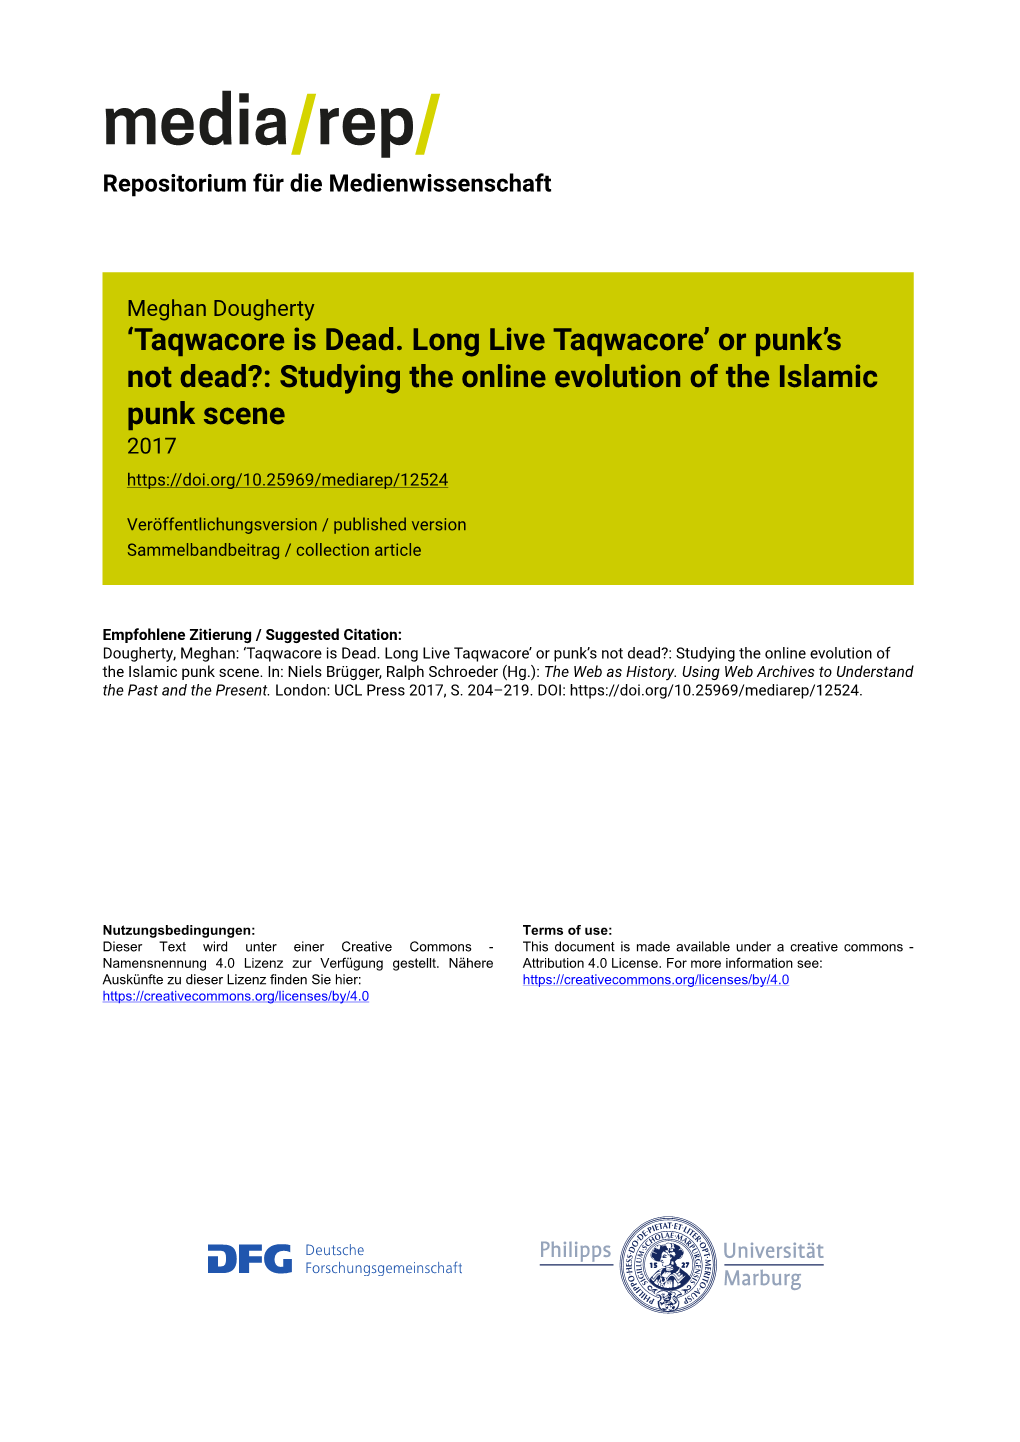 'Taqwacore Is Dead. Long Live Taqwacore' Or Punk's Not Dead?: Studying the Online Evolution of the Islamic Punk Scene